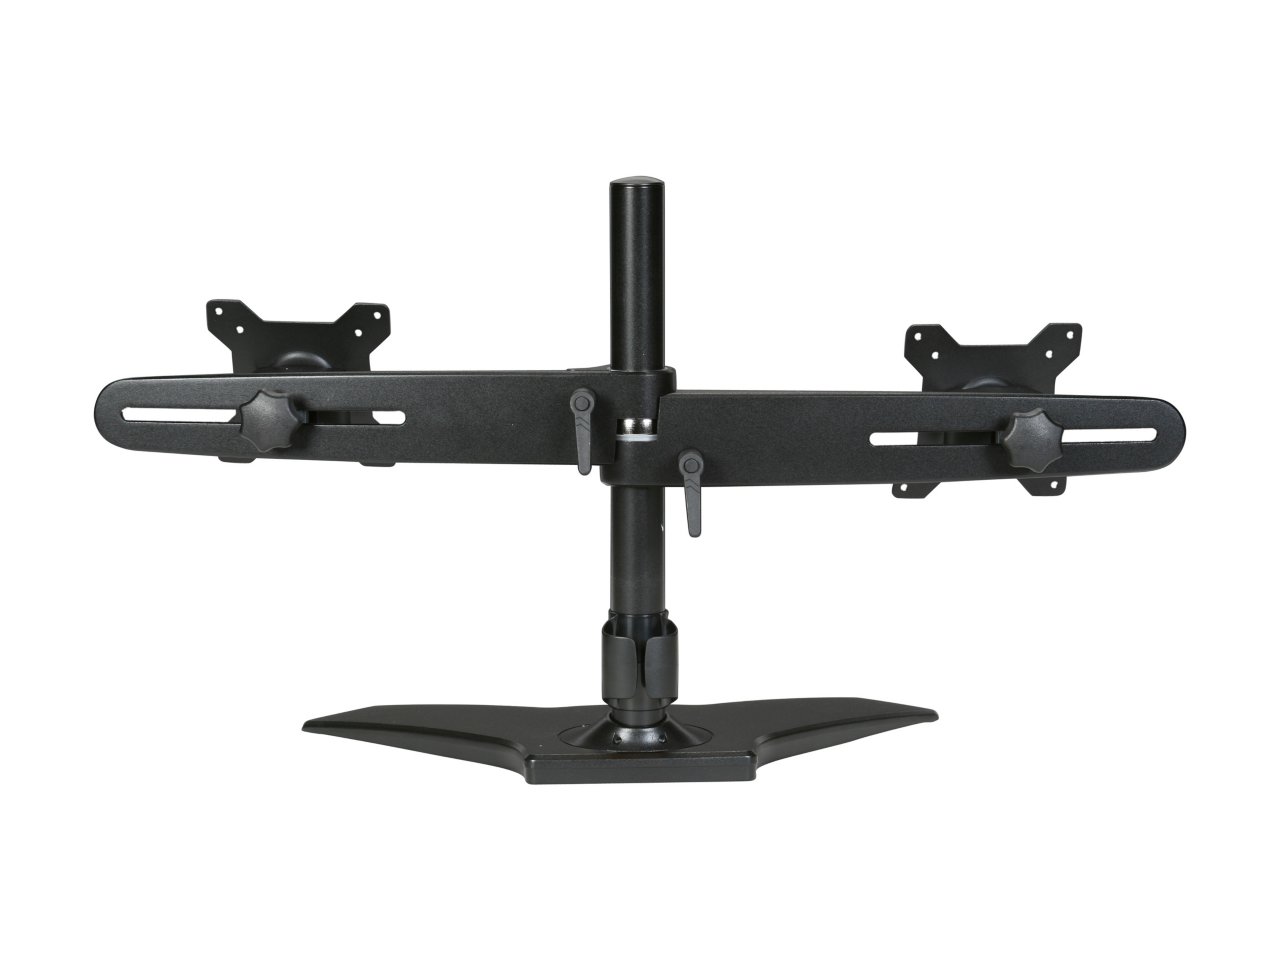 Planar Dual Monitor stand 997-5253-00 for 2 LCD displays